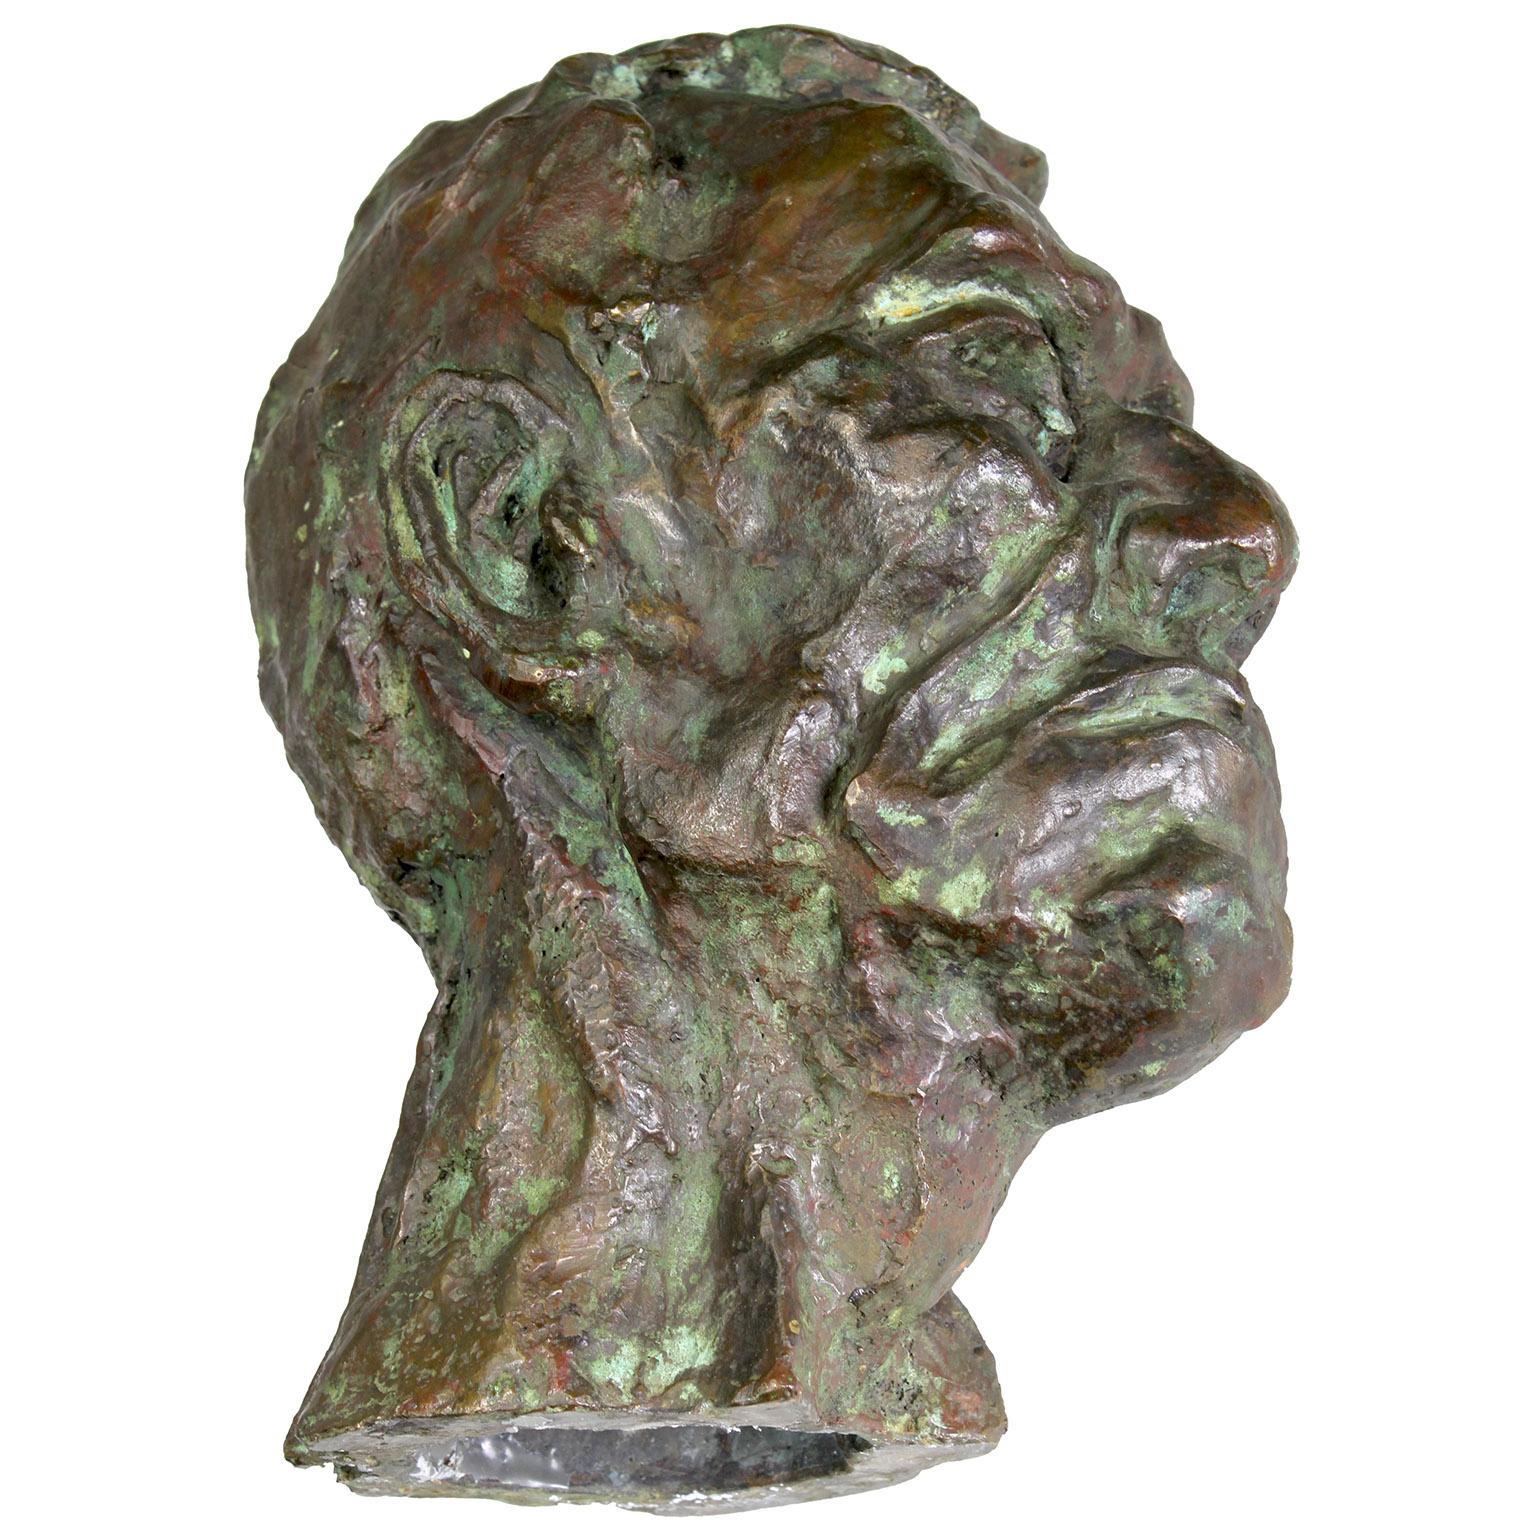 Fine Bronze Bust of a Man in Manner of Sir Jacob Epstein (British 1880-1959) For Sale 1